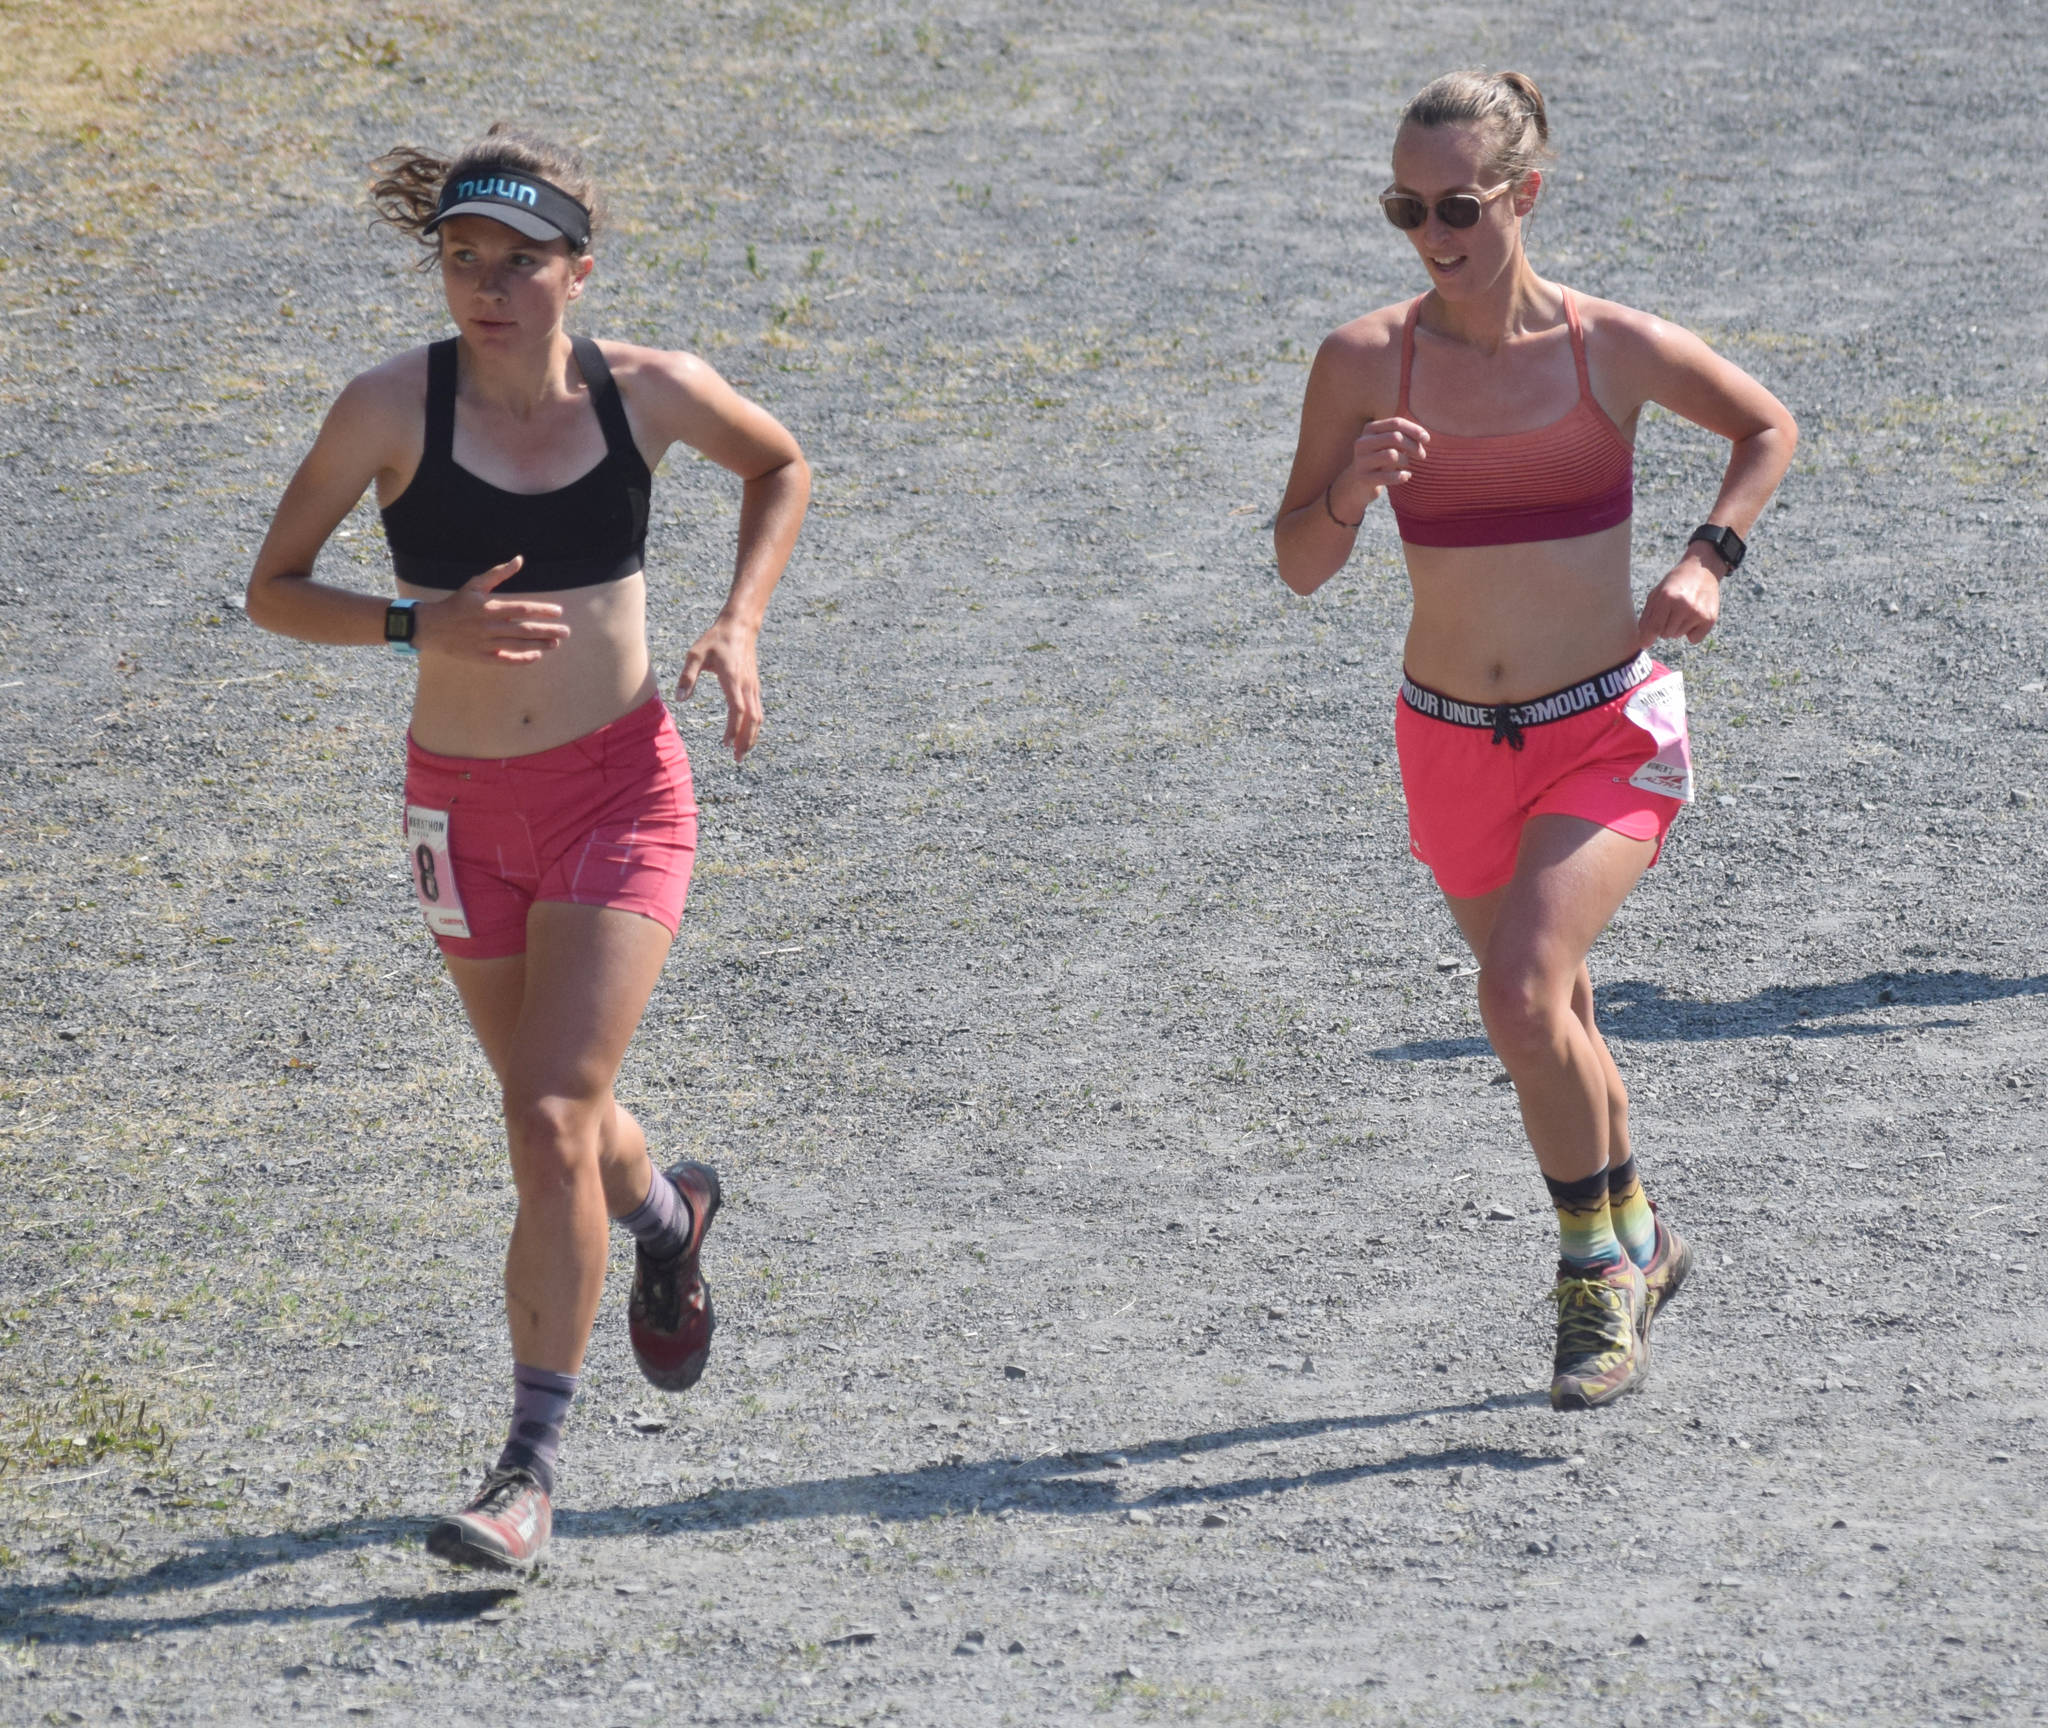 Abby Jahn of Anchorage and Allison Barnwell of Seward approach the mountain during the women’s Mount Marathon Race on Thursday, July 4, 2019, in Seward, Alaska. (Photo by Jeff Helminiak/Peninsula Clarion)